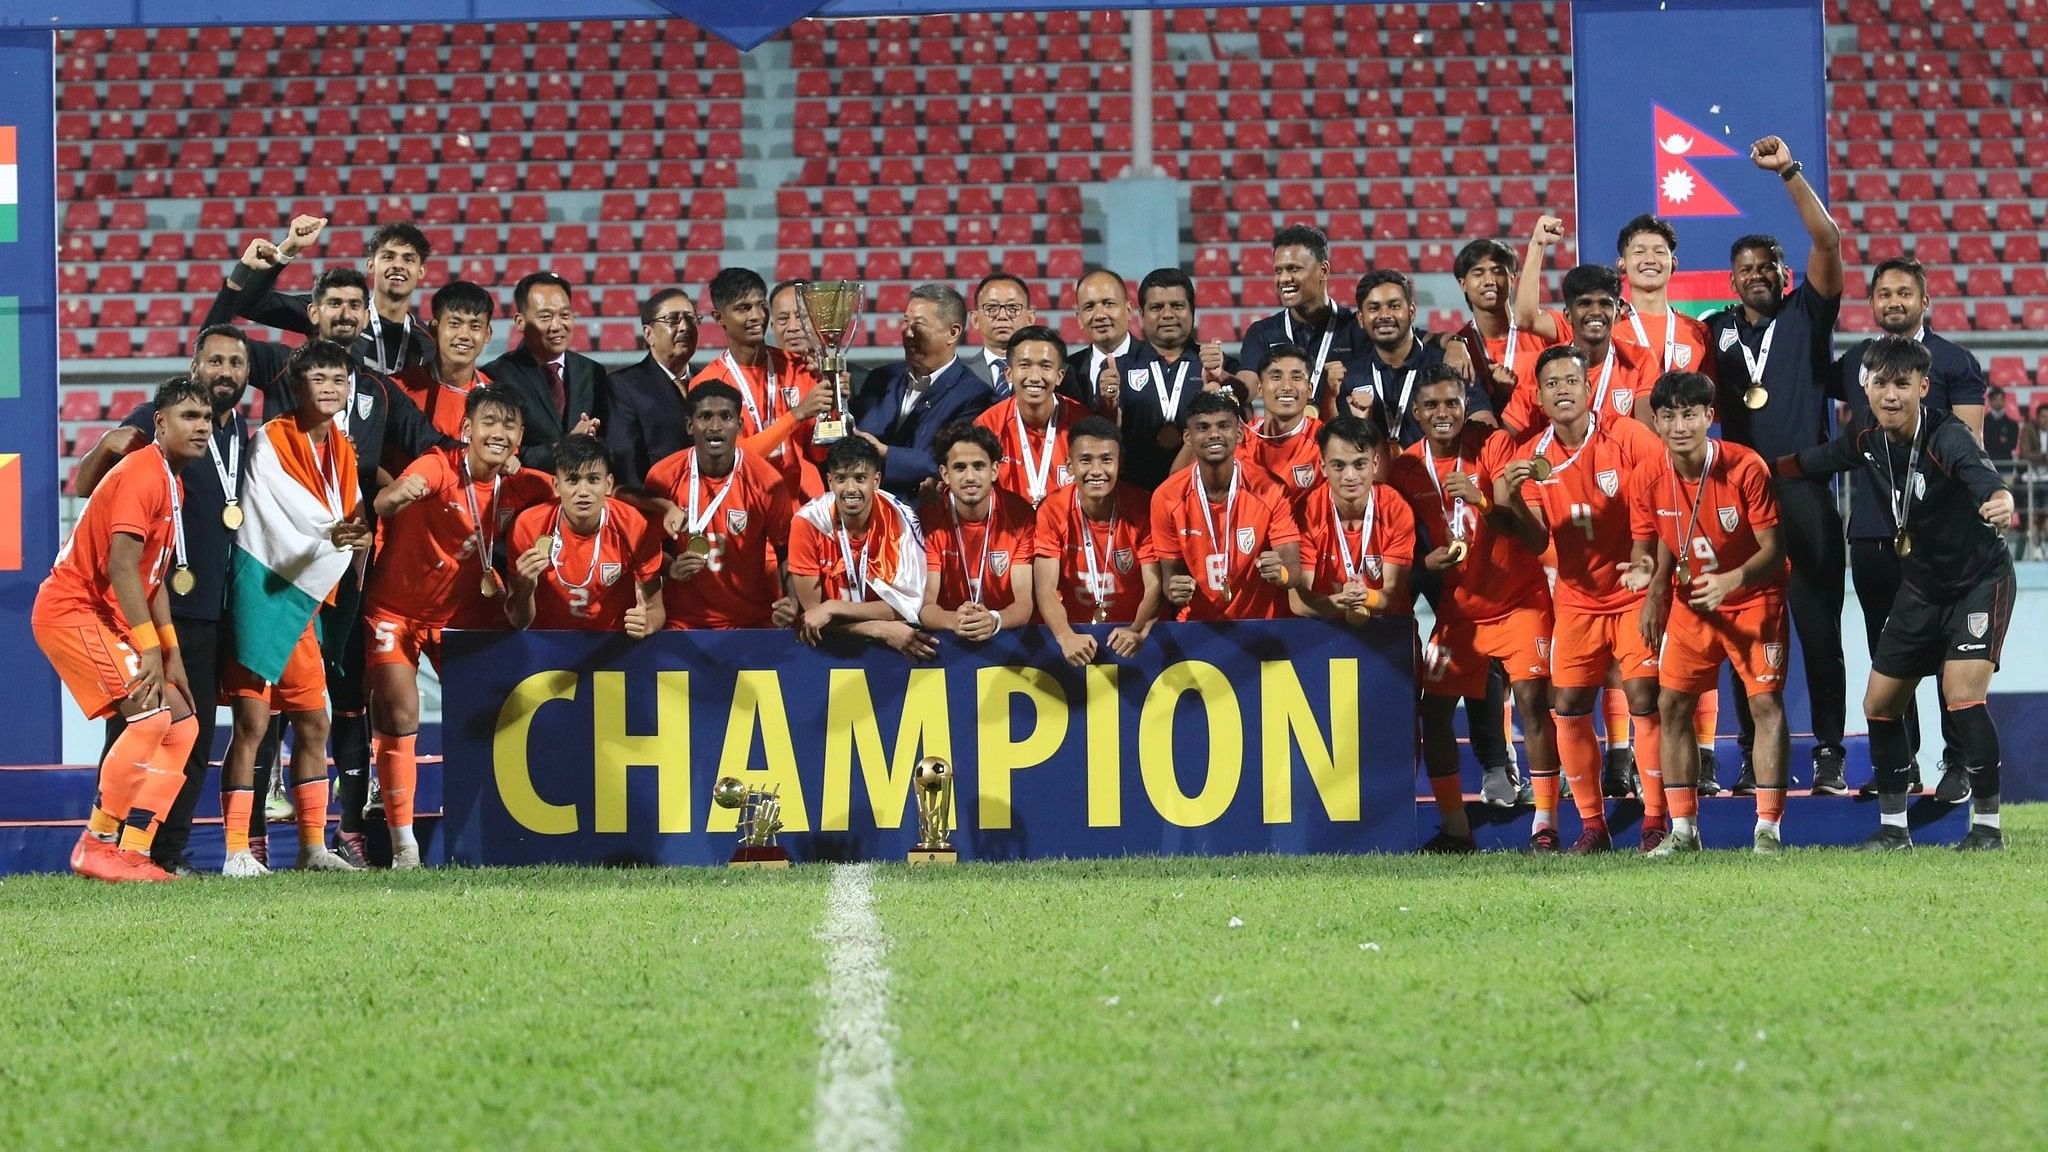 <div class="paragraphs"><p>Indian players and support staff pose for photos with the trophy after winning the SAFF U-19 Championship 2023, at the Dashrath Stadium in Kathmandu, Nepal, Saturday, Sept. 30, 2023. India beat Pakistan 3-0 in the final.</p></div>